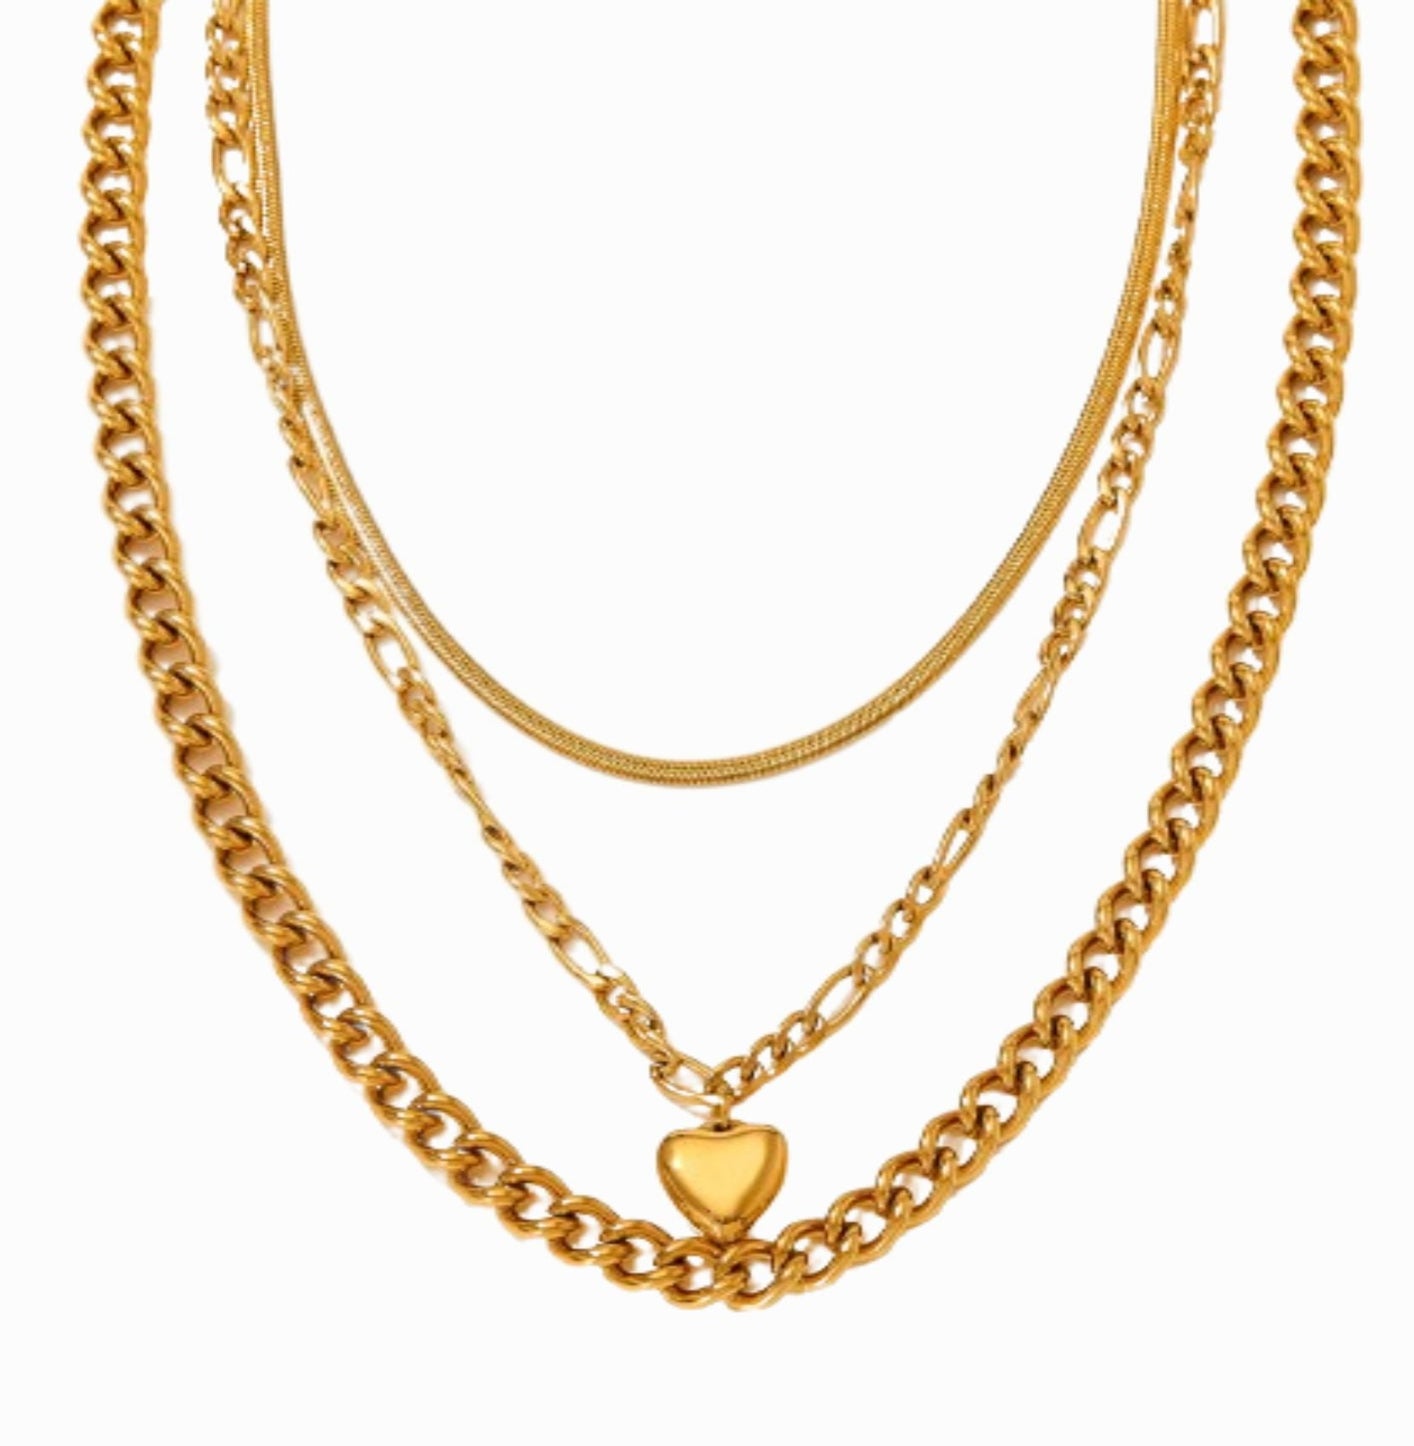 HEART MULTI NECKLACE neck Yubama Jewelry Online Store - The Elegant Designs of Gold and Silver ! 